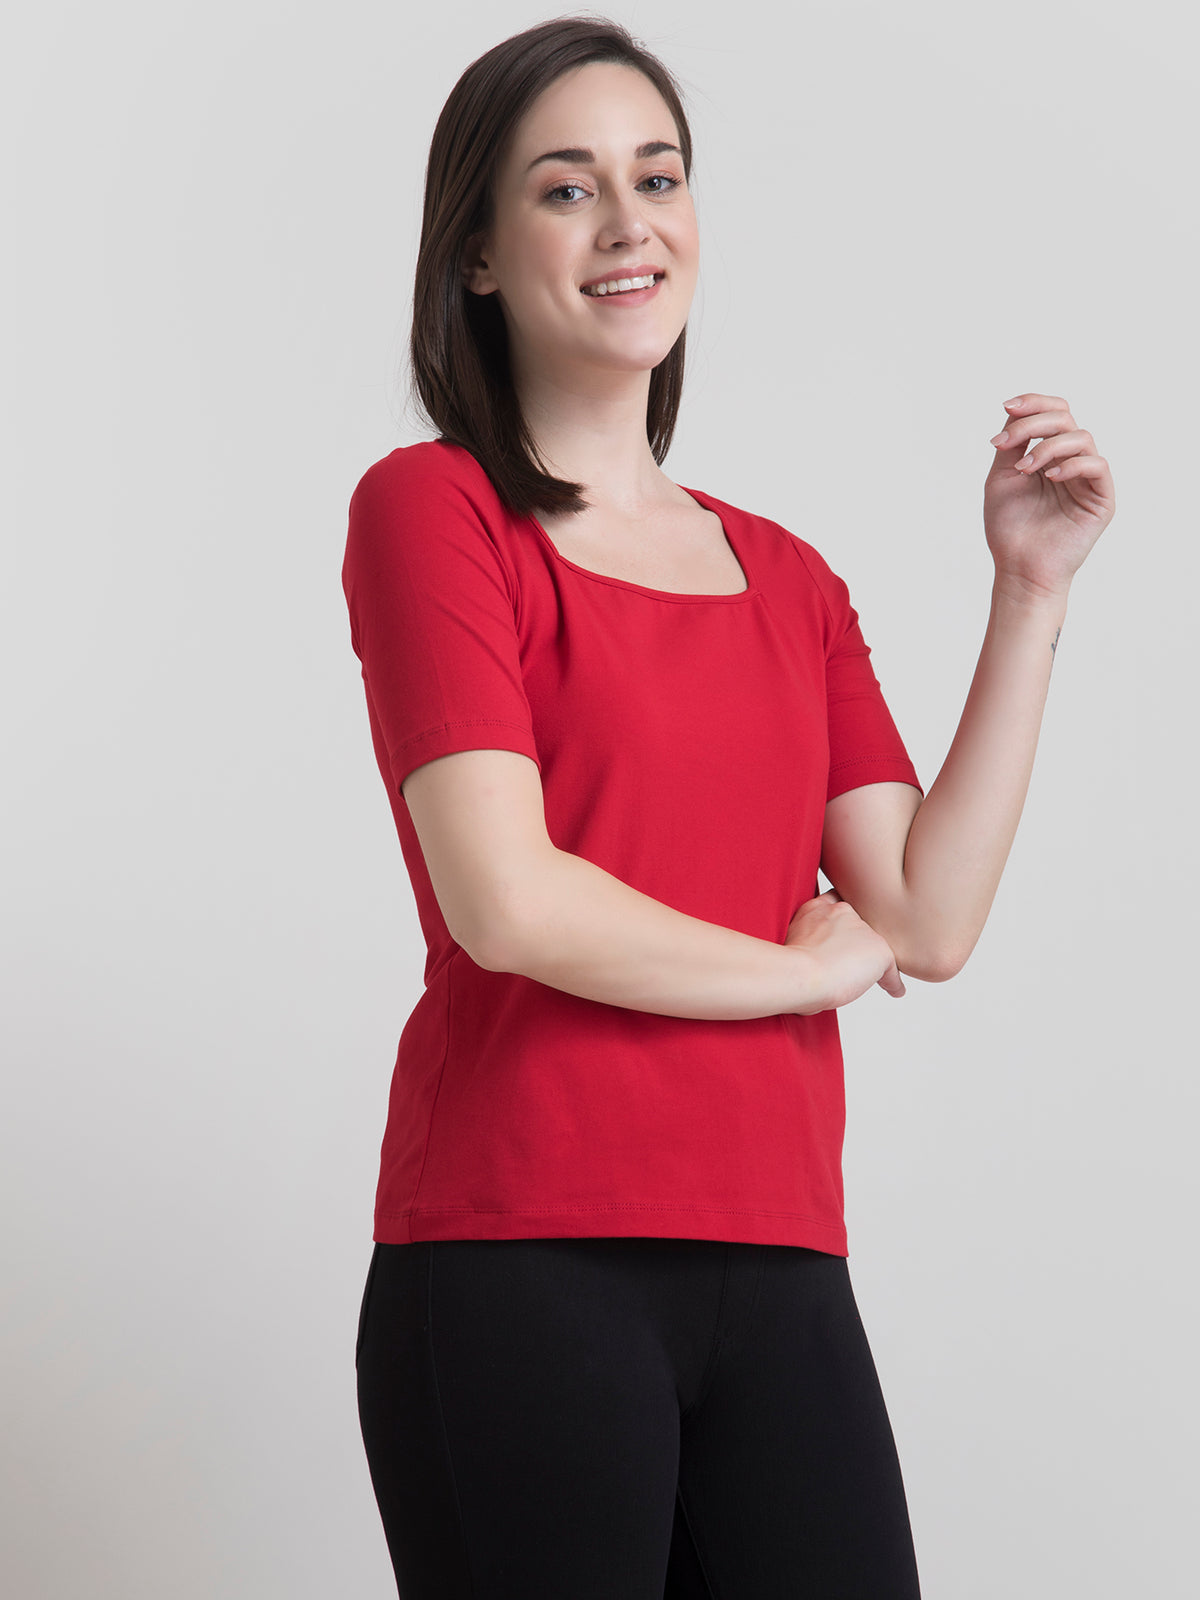 Cotton Square Neck Knitted T Shirt - Red